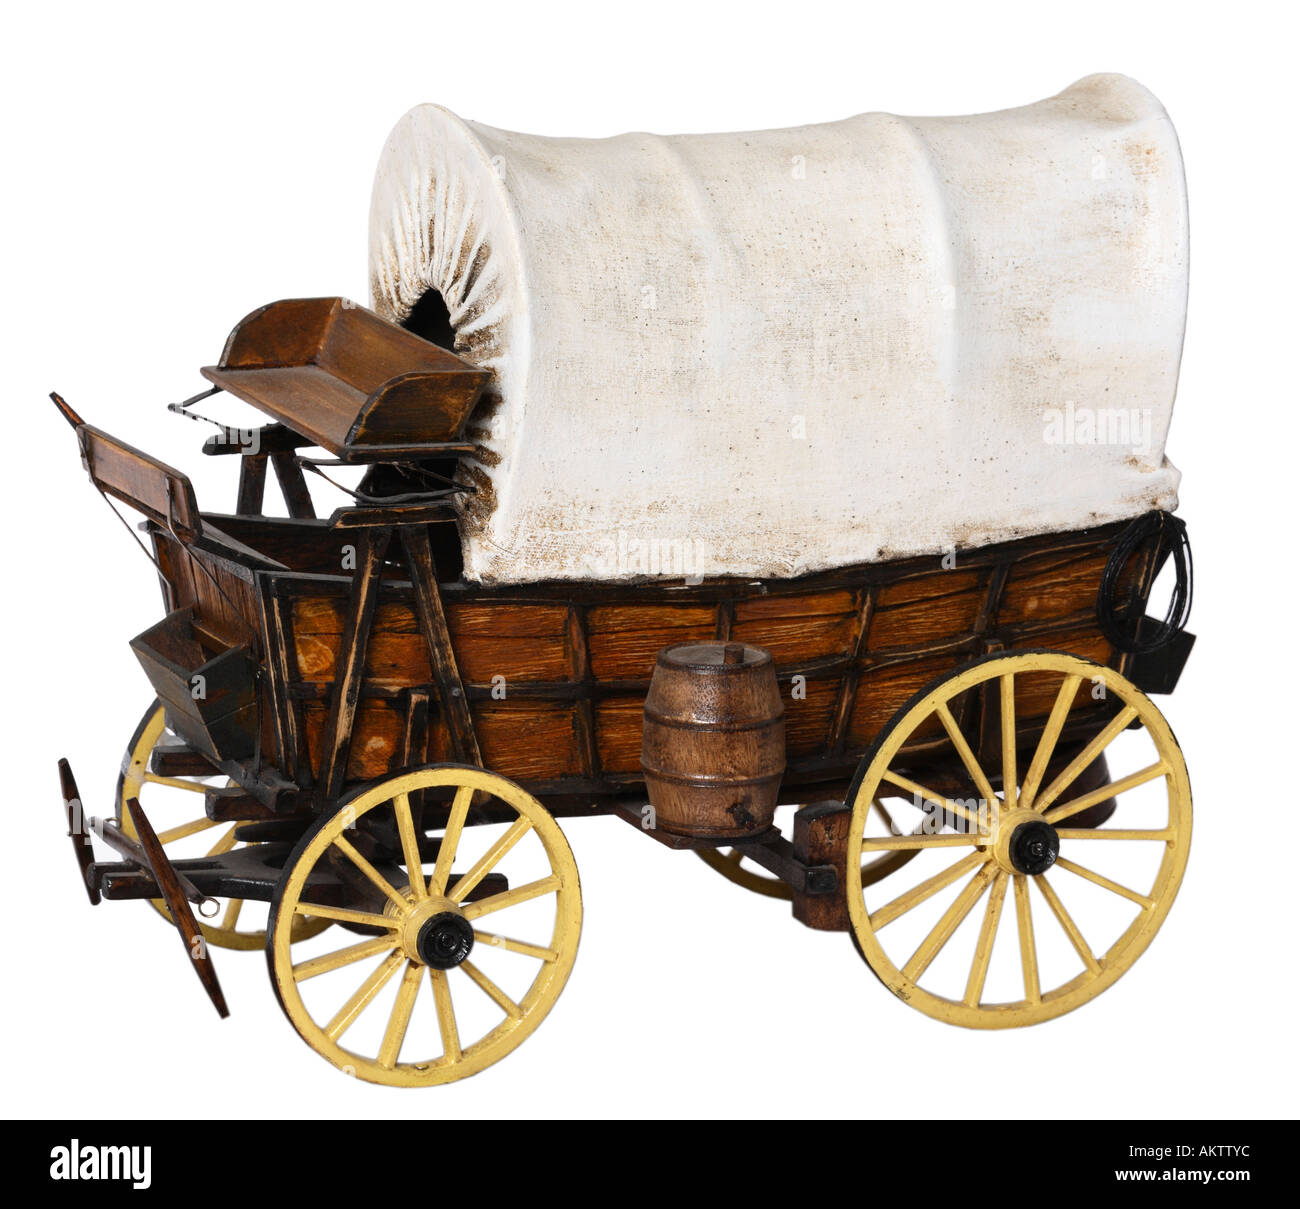 Covered Wagon Model Stock Photo